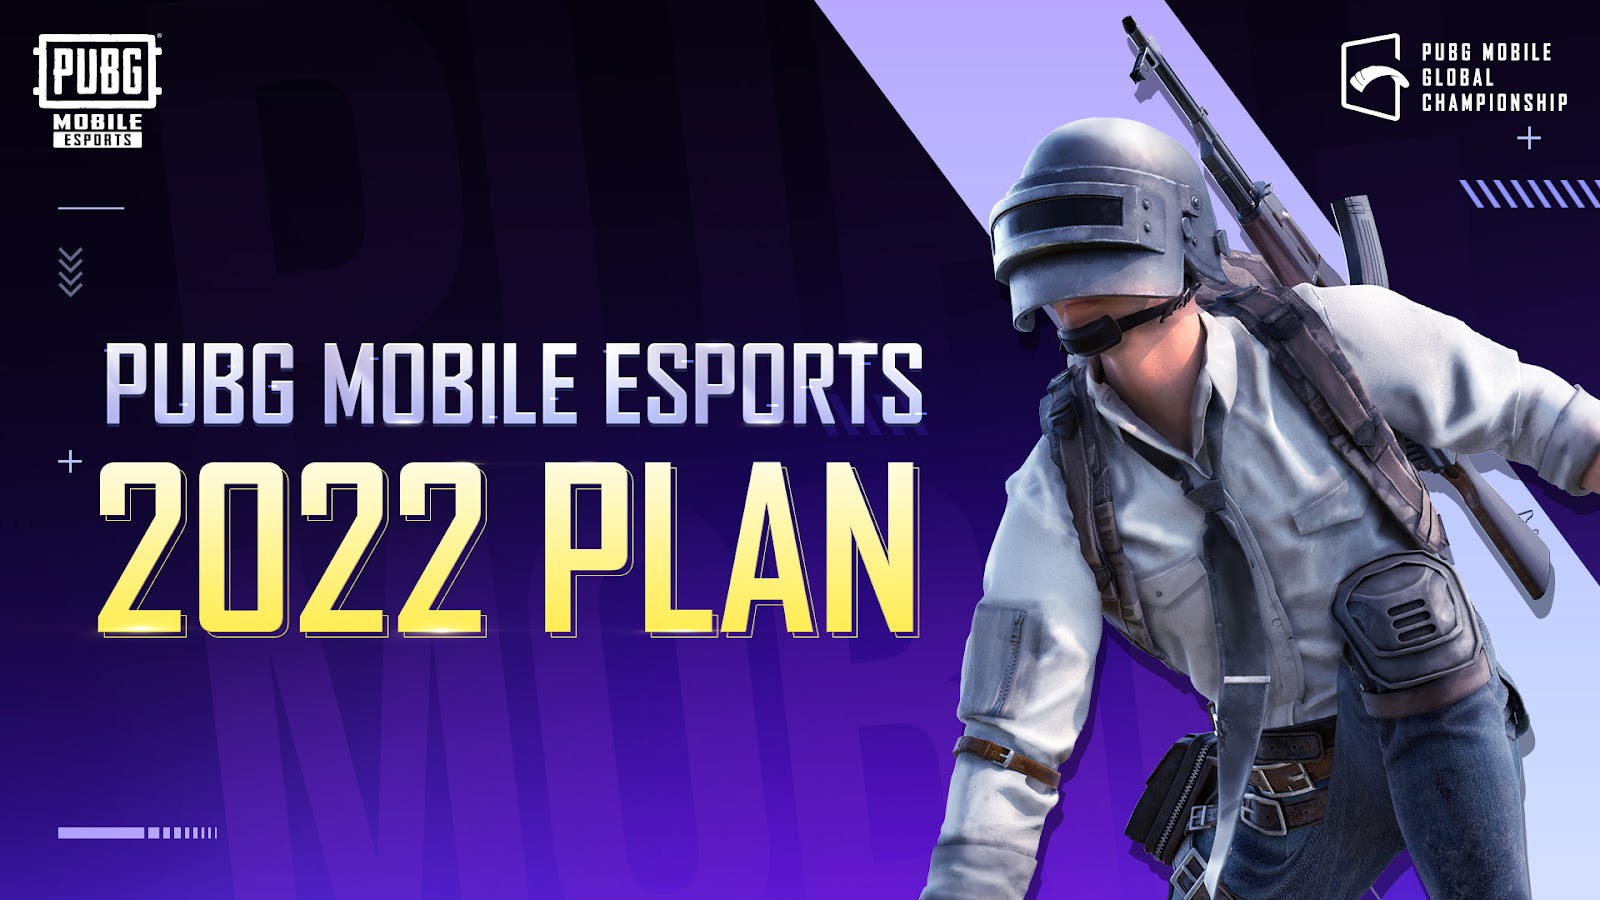 PUBG Mobile 2022 Esports Plans, Will introduce new Leagues and Spotlight Star Teams and Players